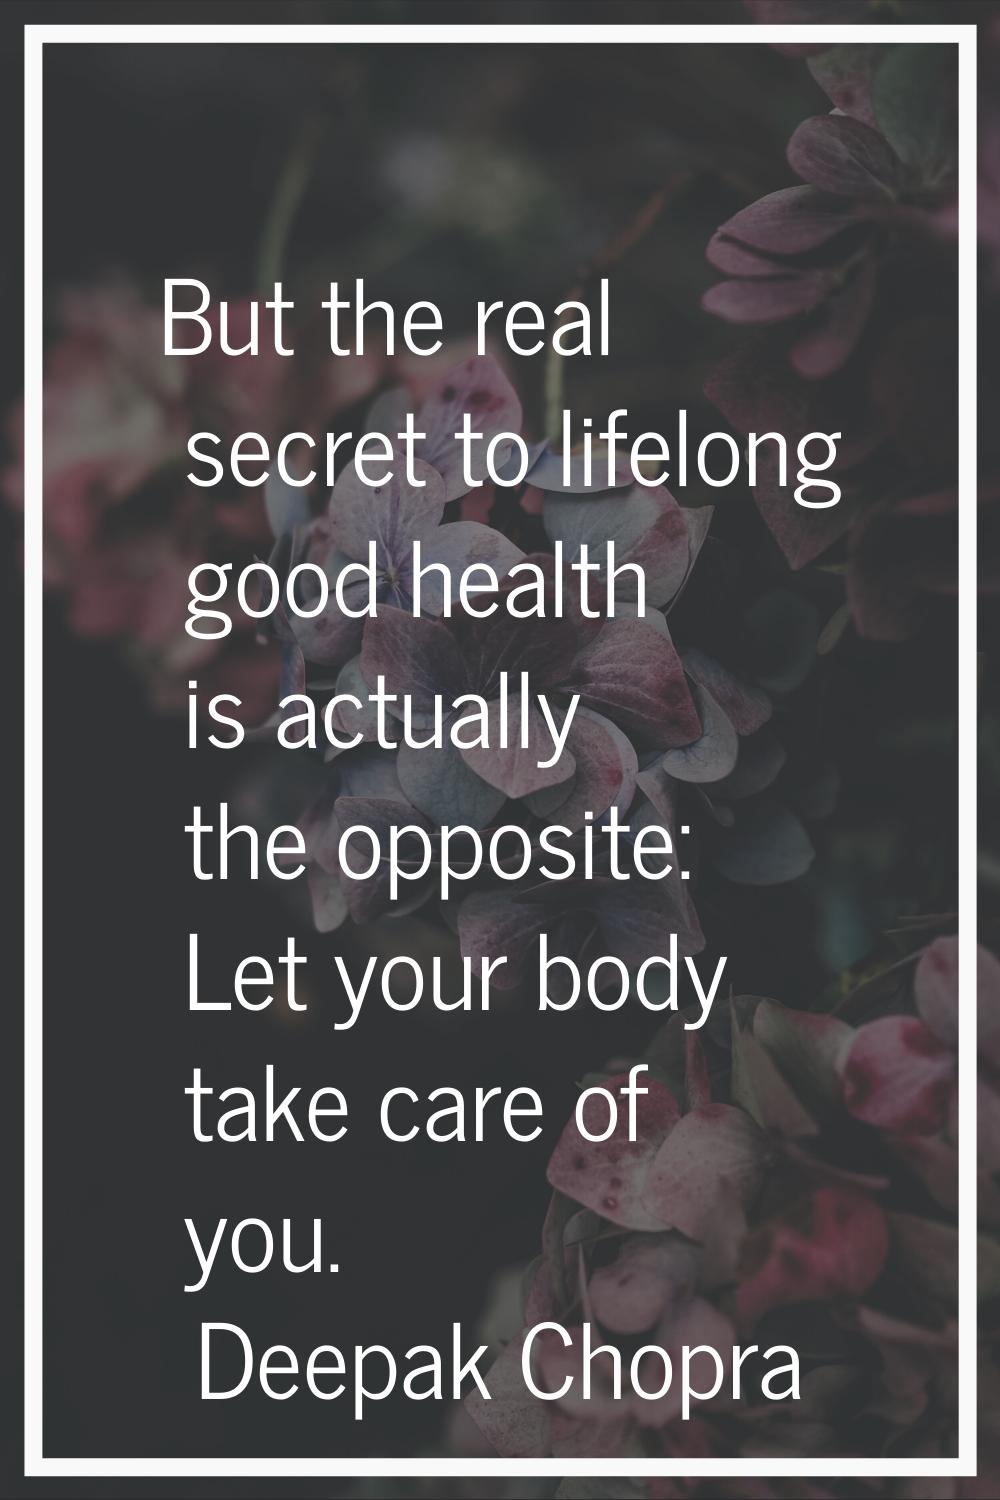 But the real secret to lifelong good health is actually the opposite: Let your body take care of yo